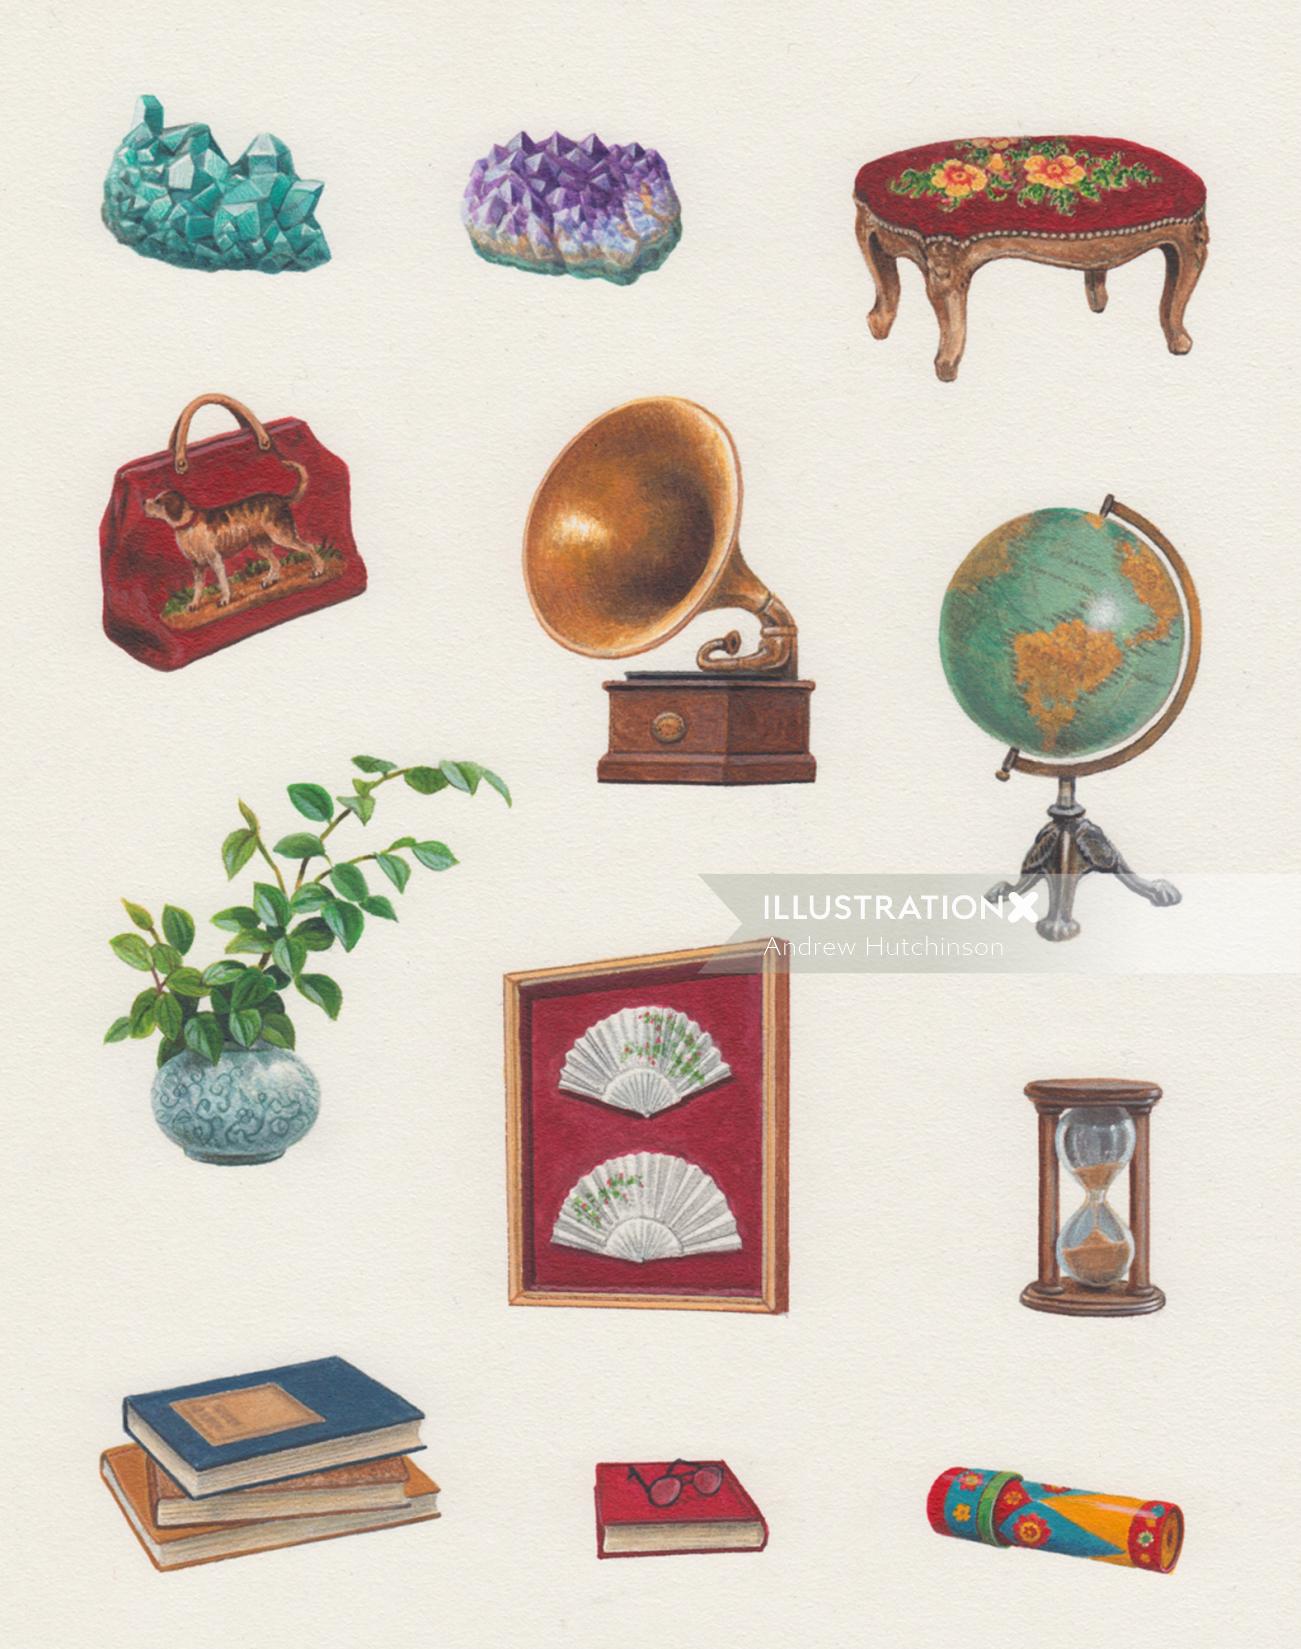 Jacquie Lawson commissioned an illustration of Victorian library materials